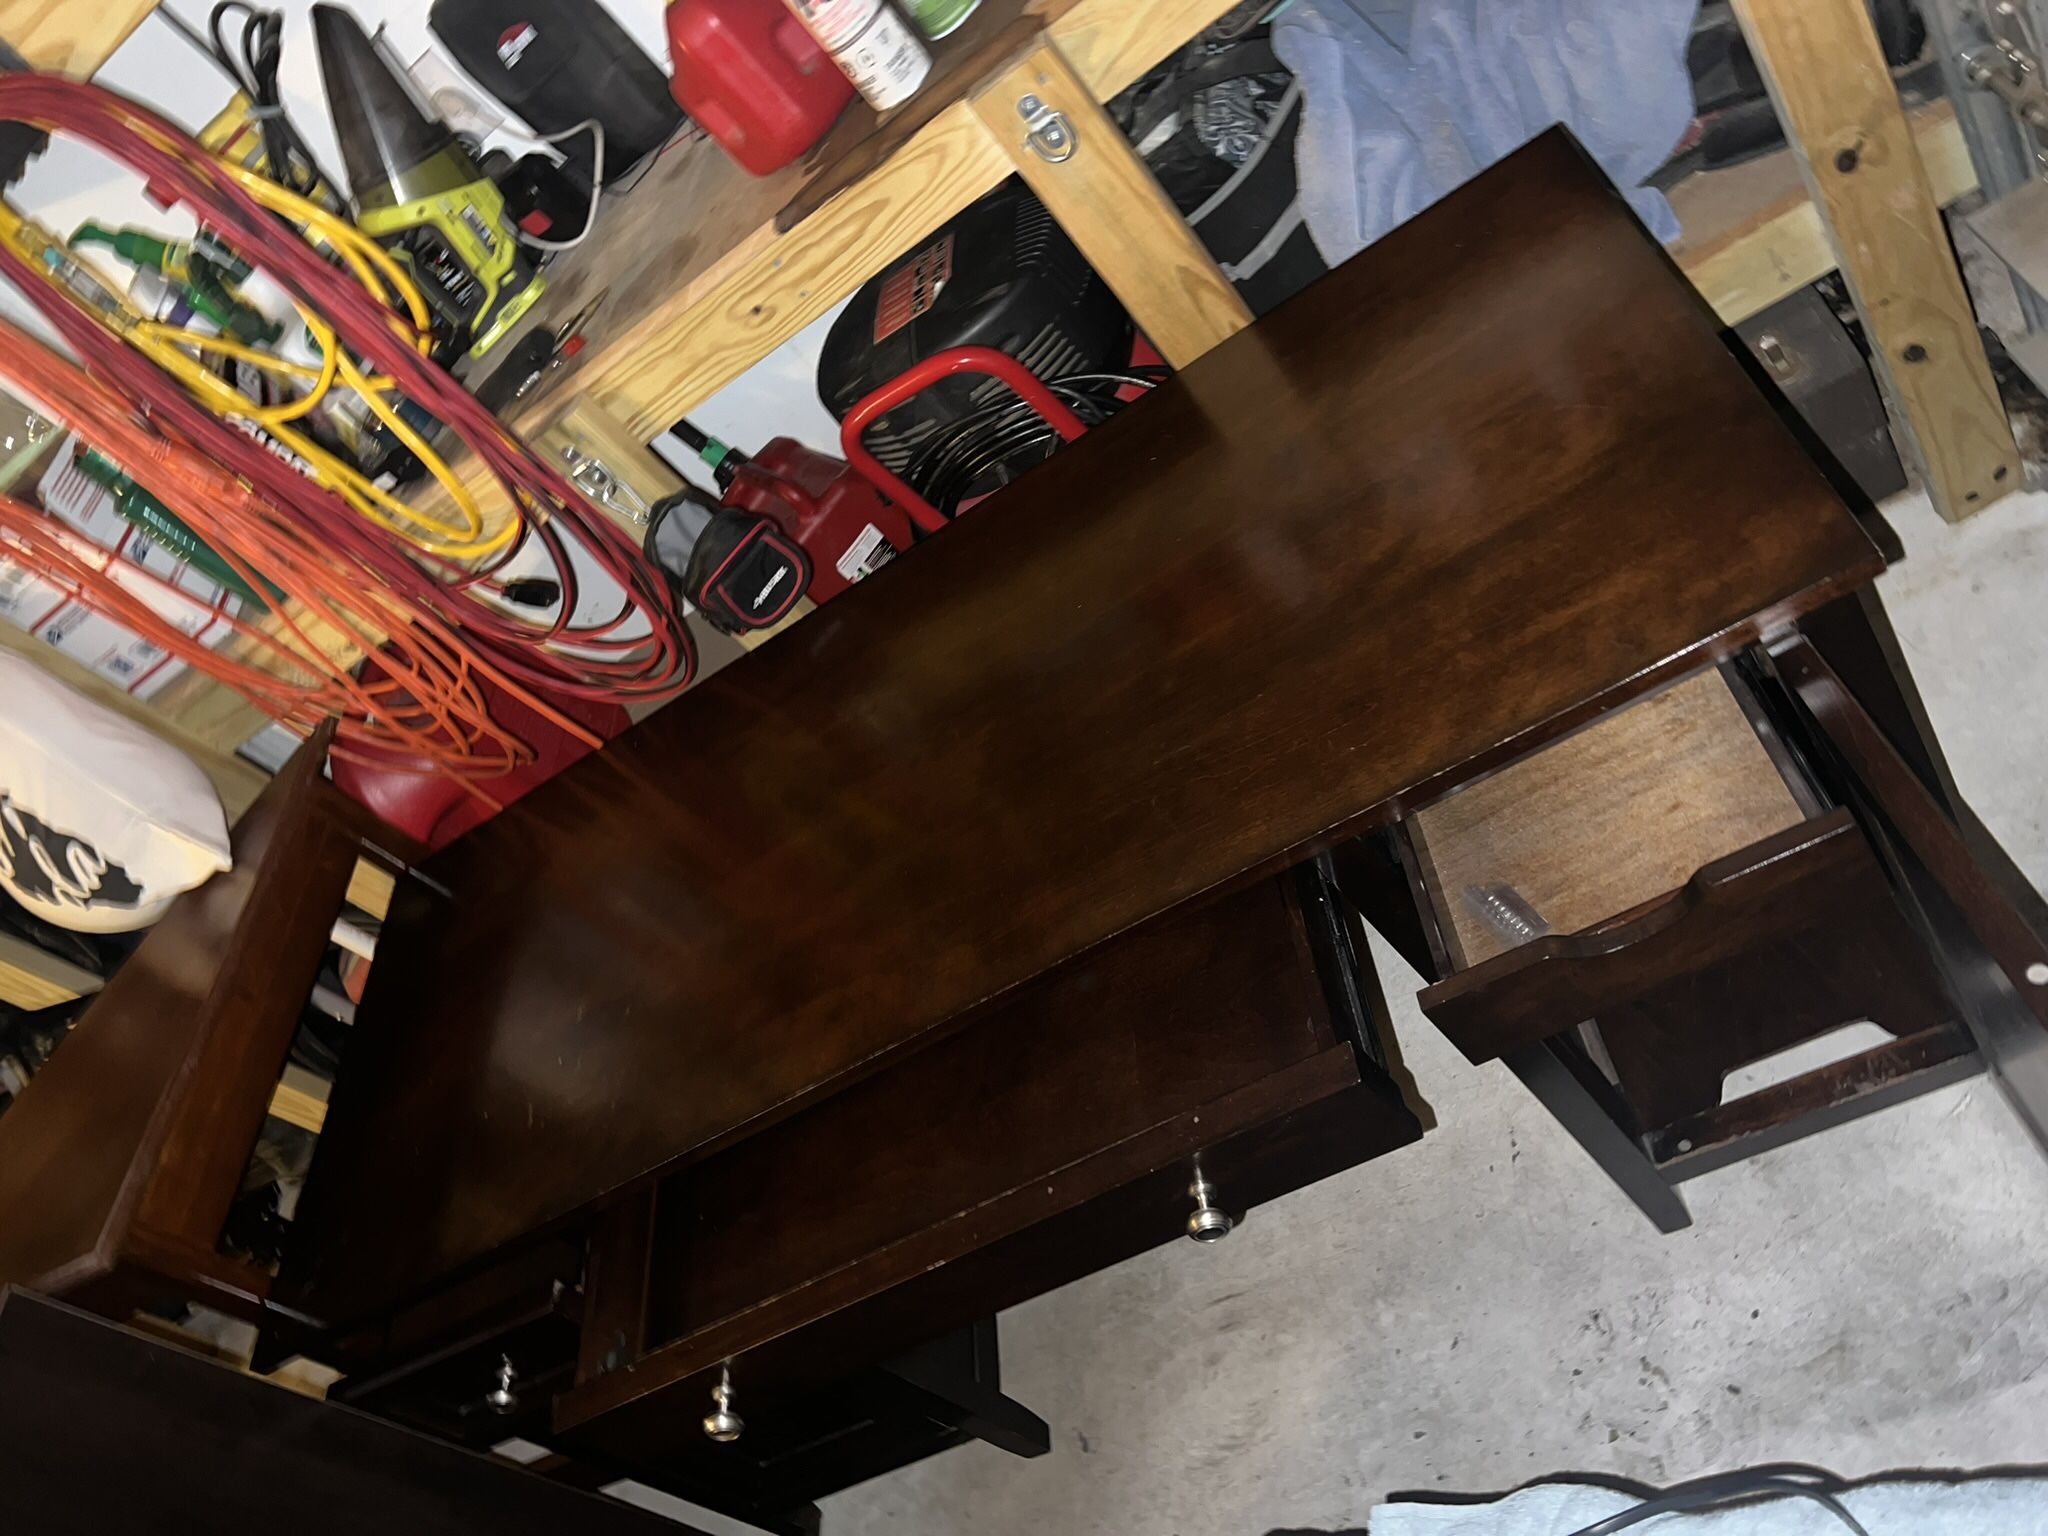 Quality Wooden Tables / Desks (last Day 3/10)